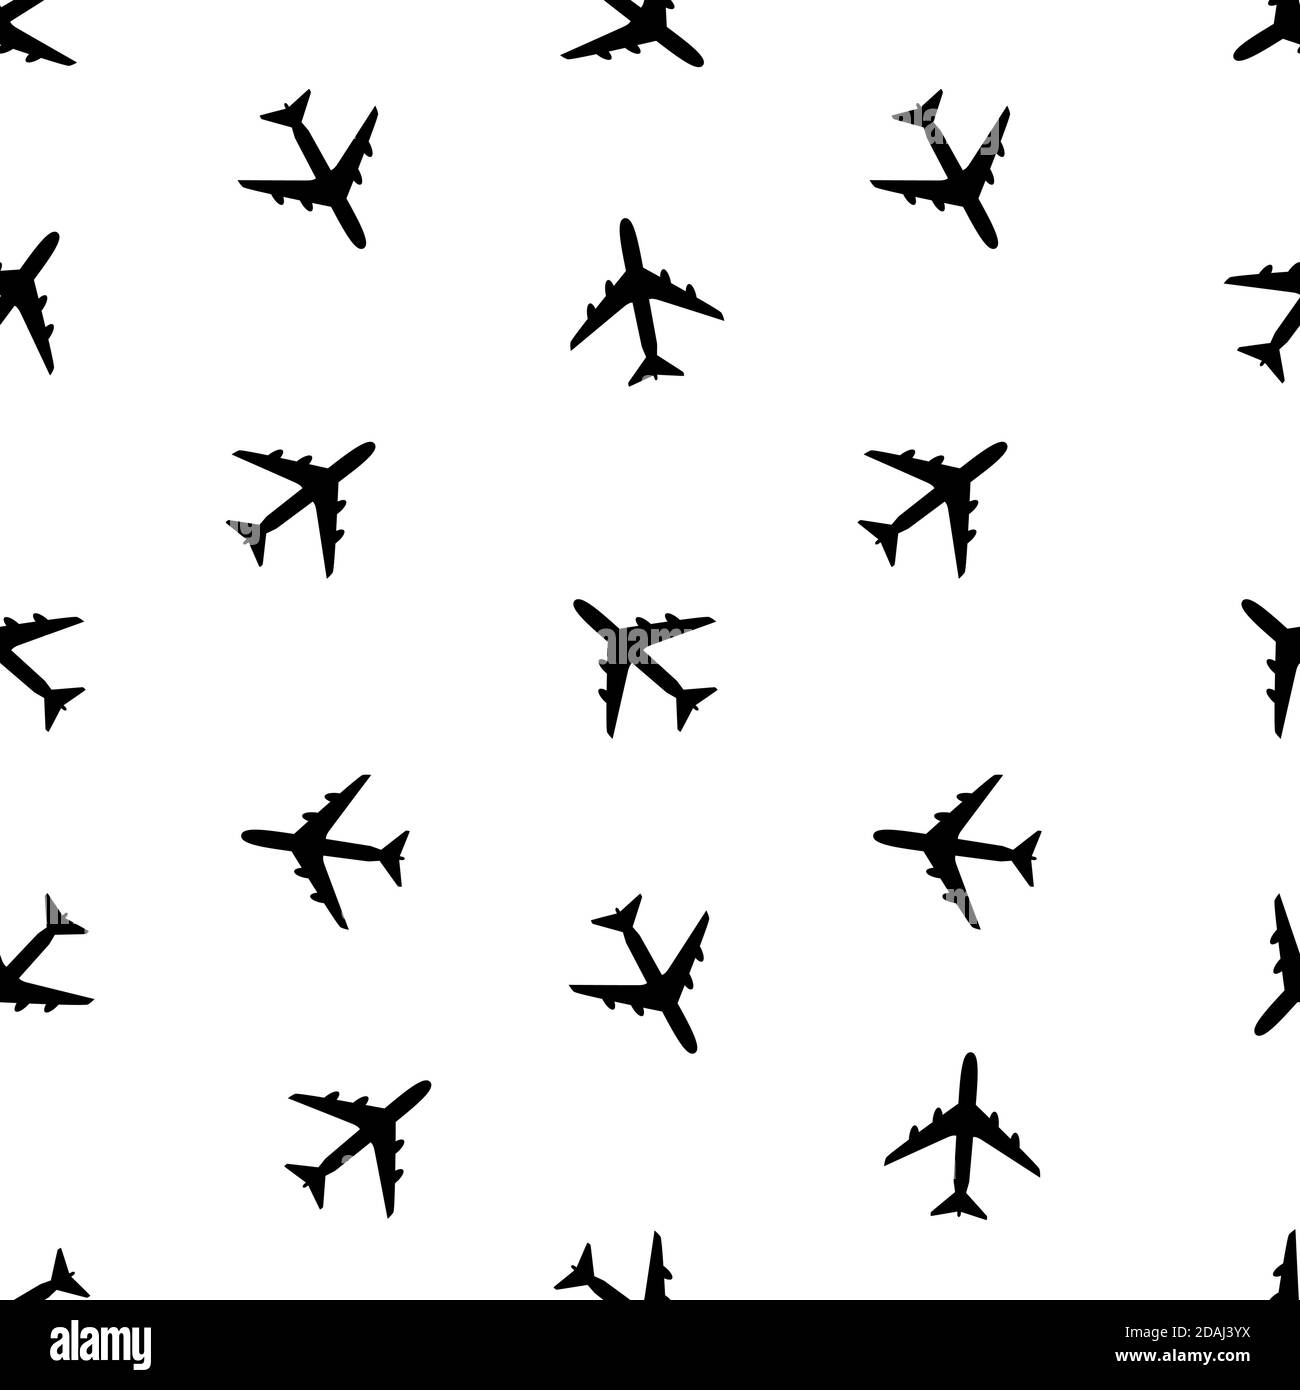 Airplane Seamless Pattern on Background Vector Illustration Stock Vector